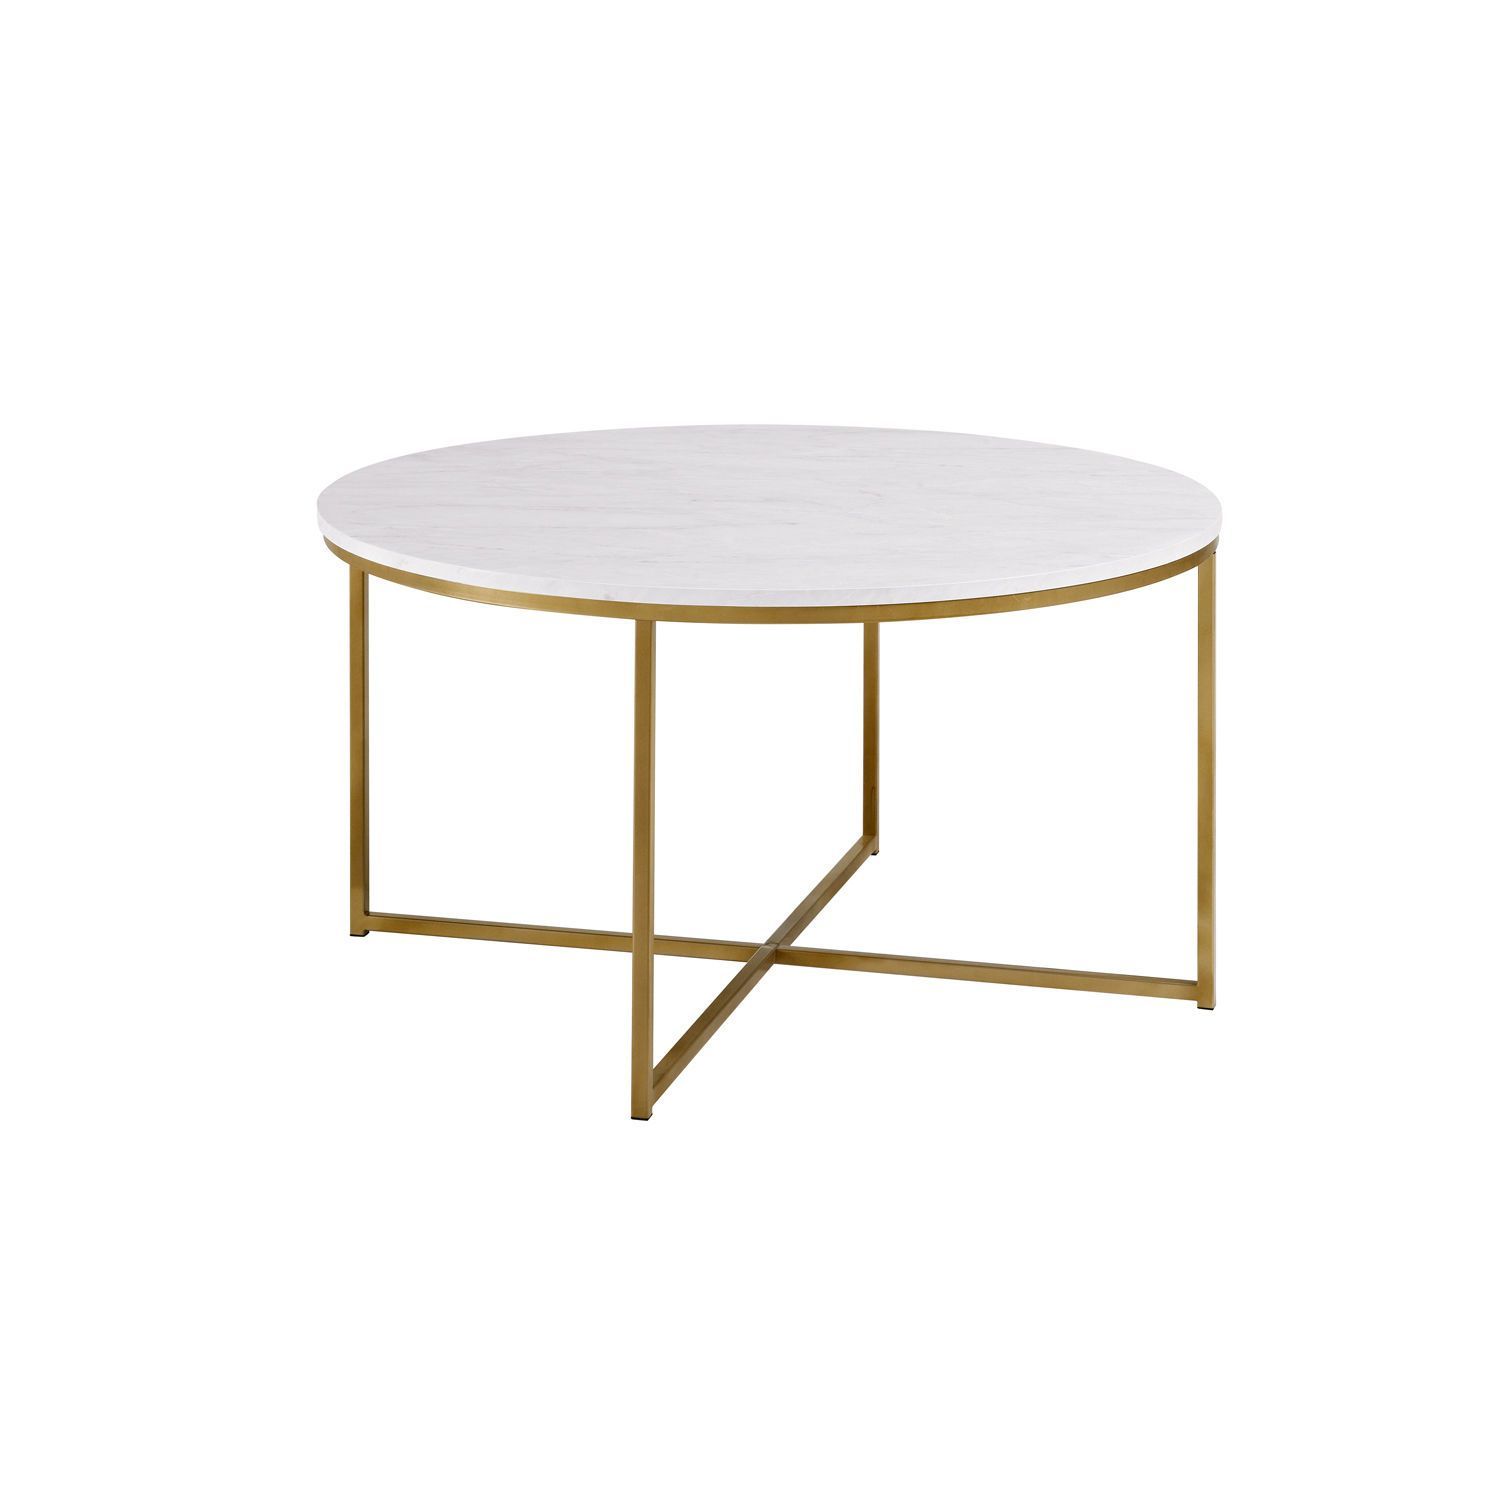 Gold X Base Faux Marble Round Coffee Table | Glam Coffee Table, Coffee Inside Modern Round Faux Marble Coffee Tables (Gallery 18 of 20)